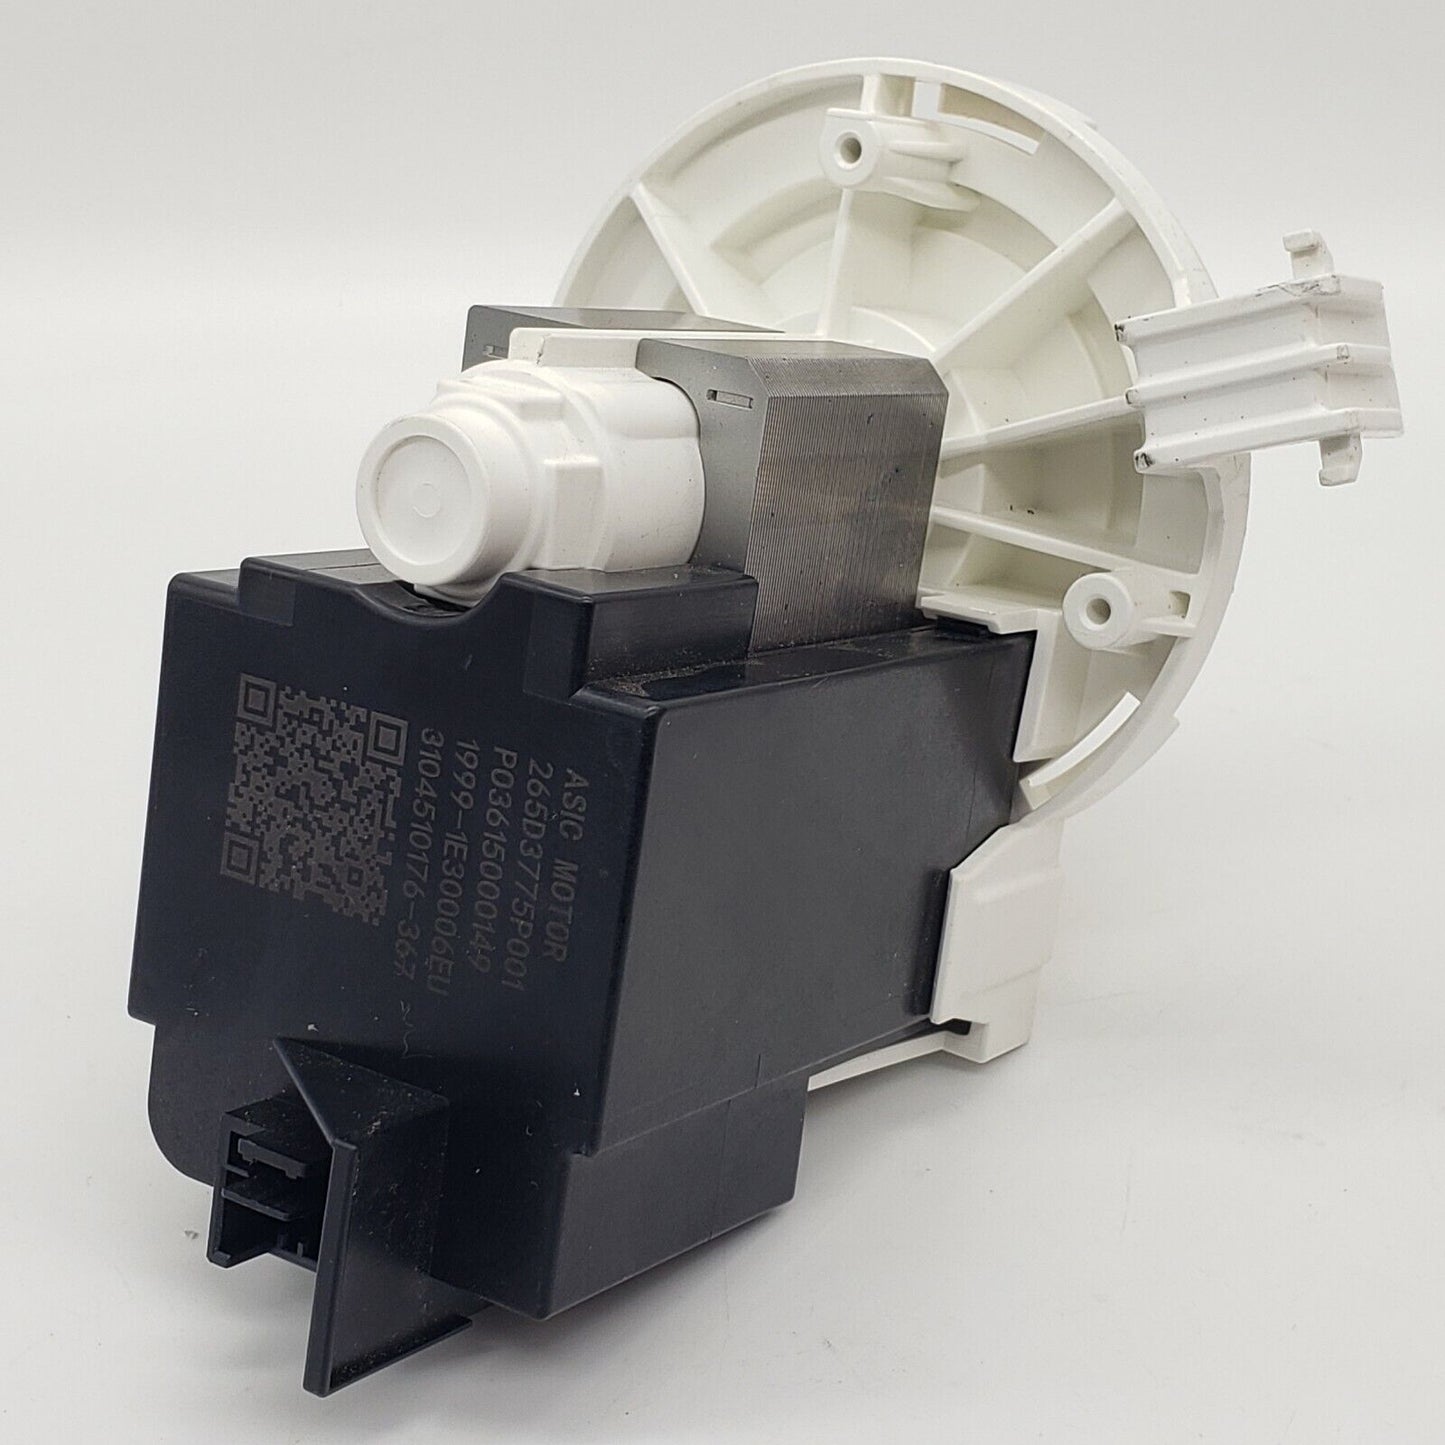 Replacement for GE Dishwasher Circulation Pump 265D3775P001